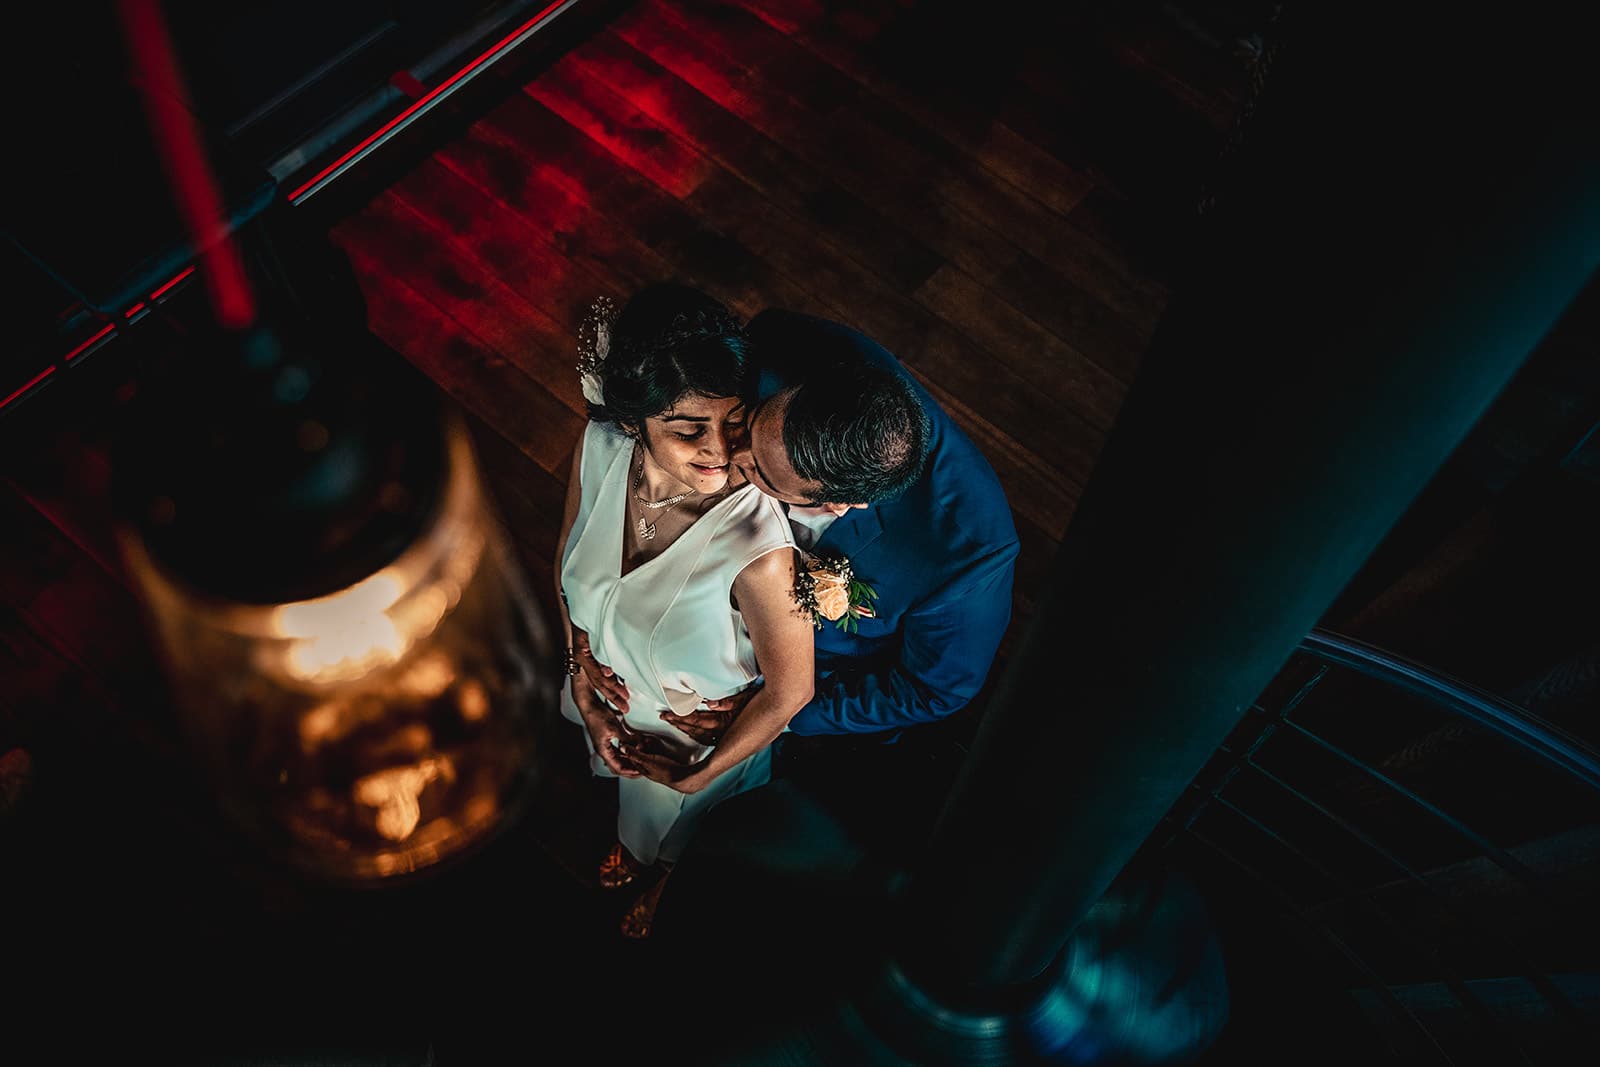  How to choose your wedding photographer 2018 2019 Best Wedding Photographer comment choisir son photographe de mariage 2018 2019 meilleur photographe de mariageLyon Photographe mariage Lyon Photographe reportage mariage Lyon